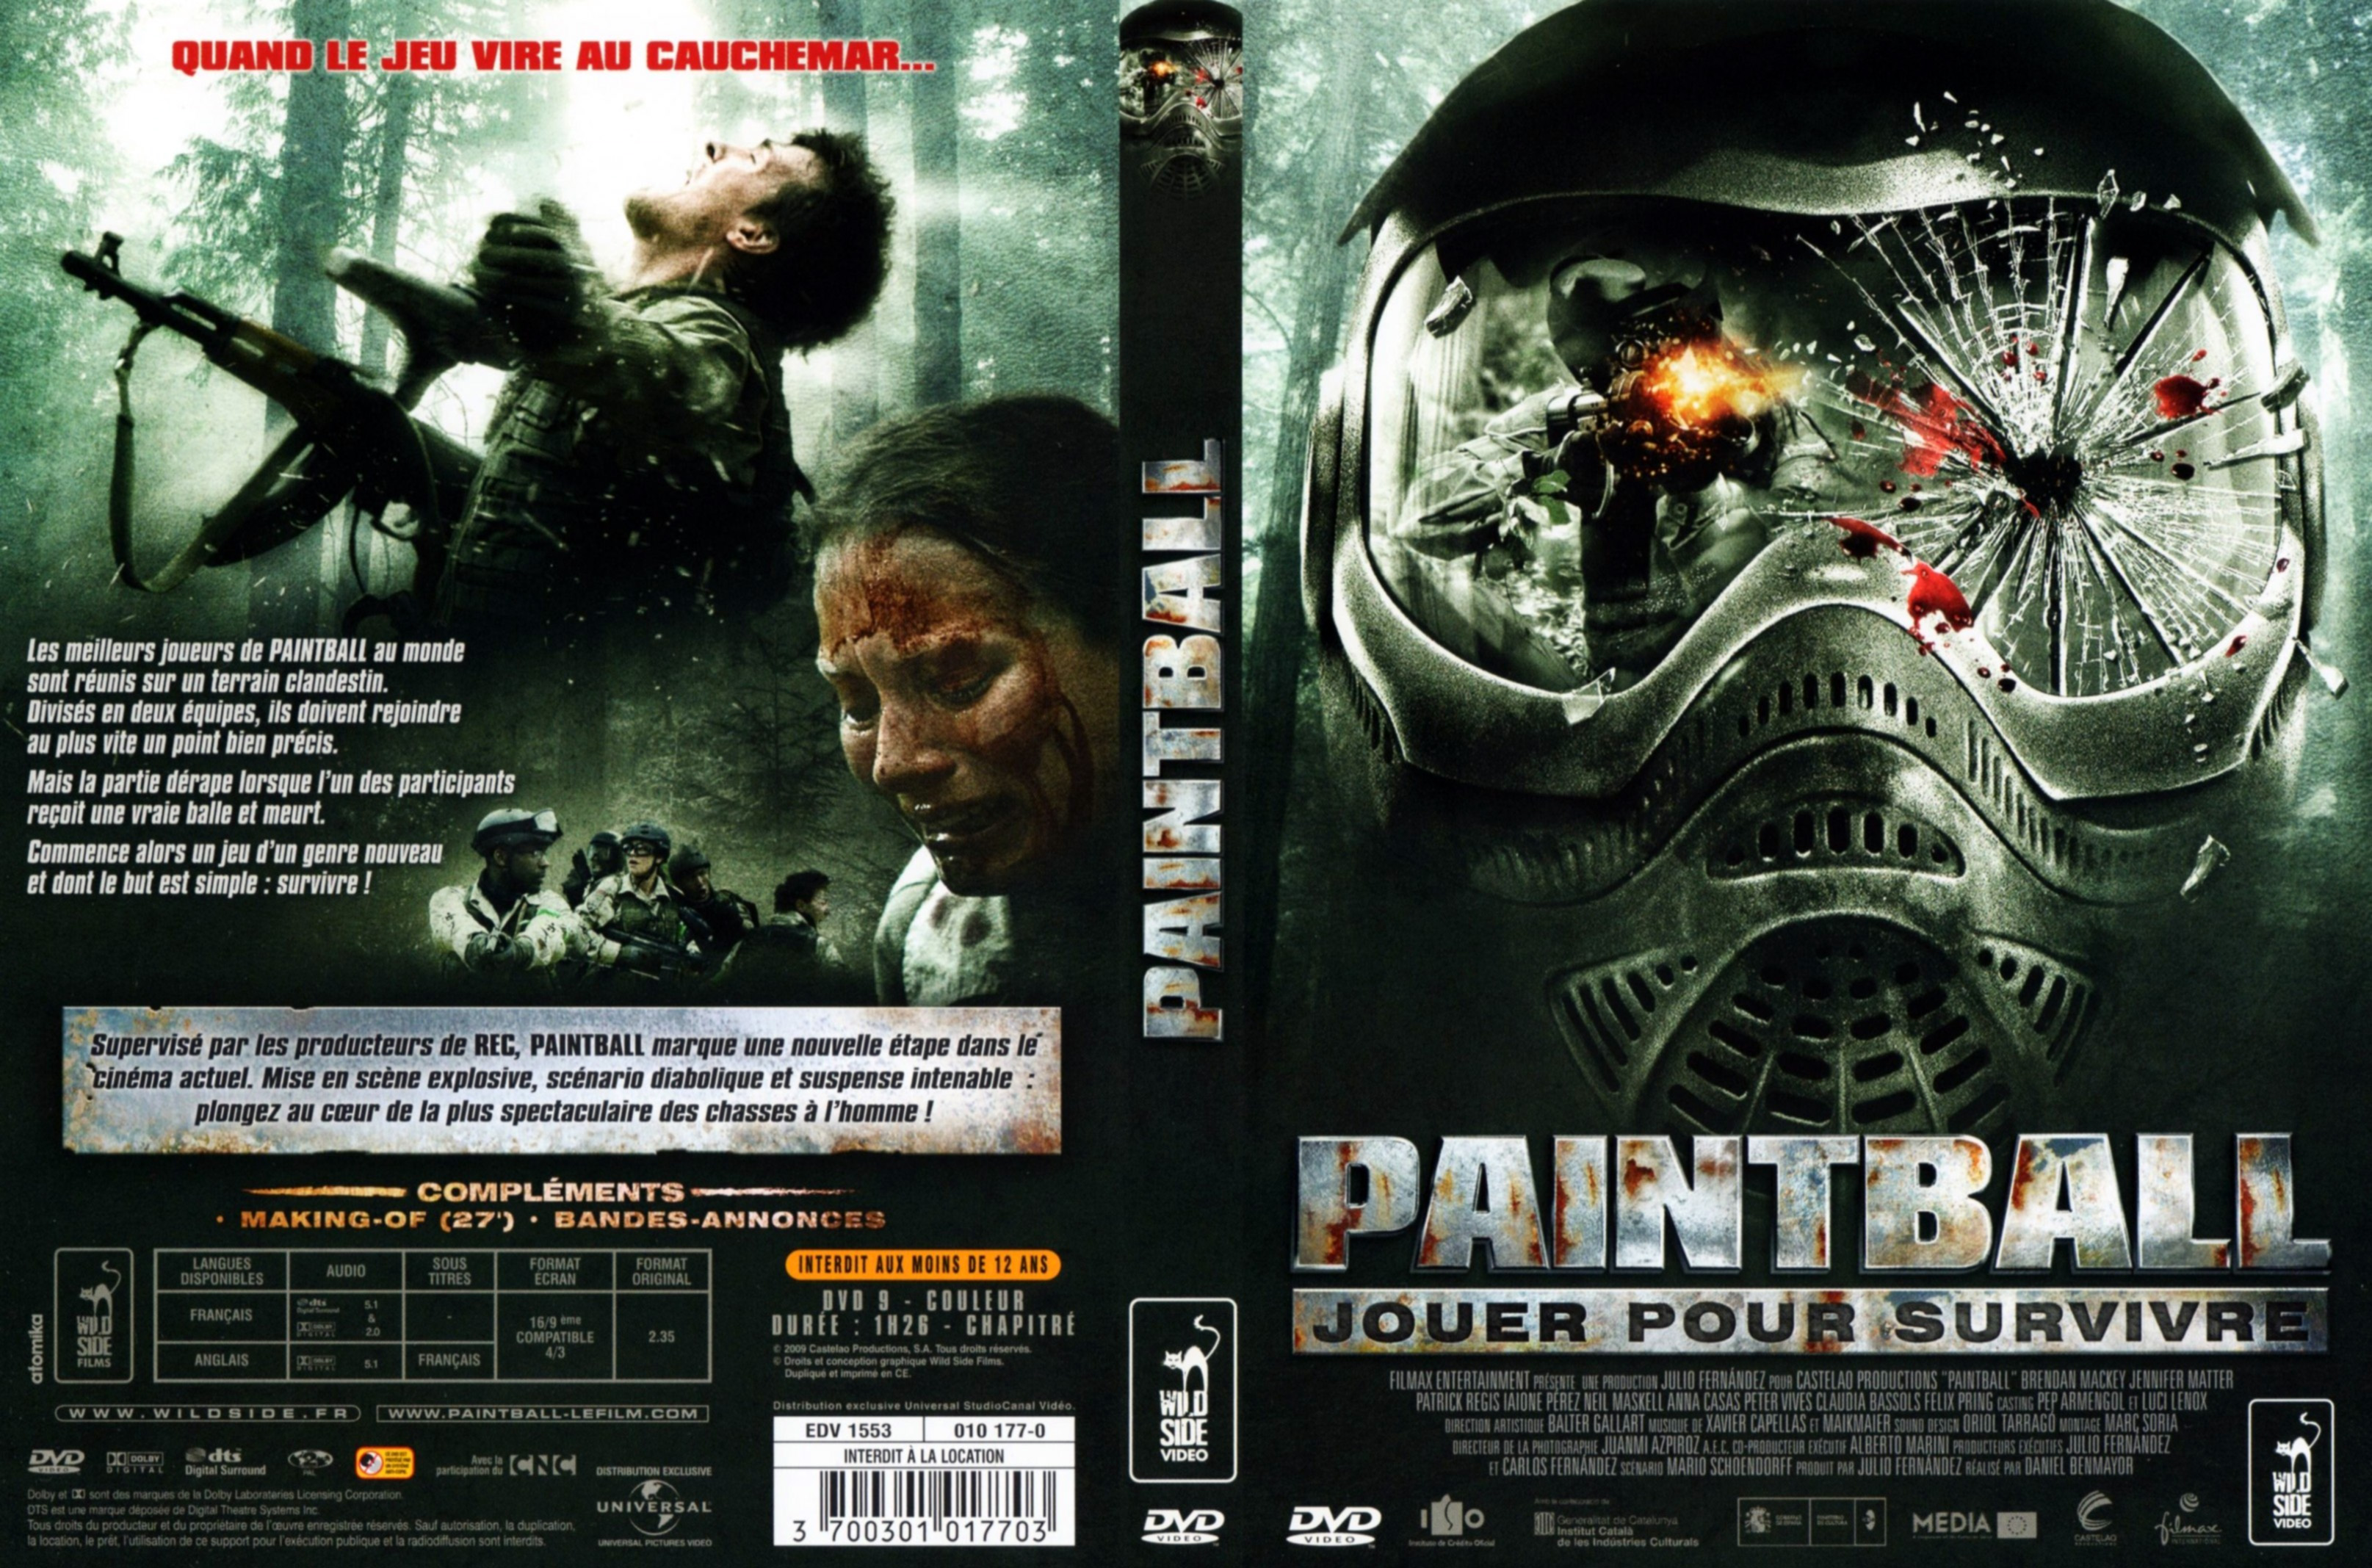 Jaquette DVD Paintball